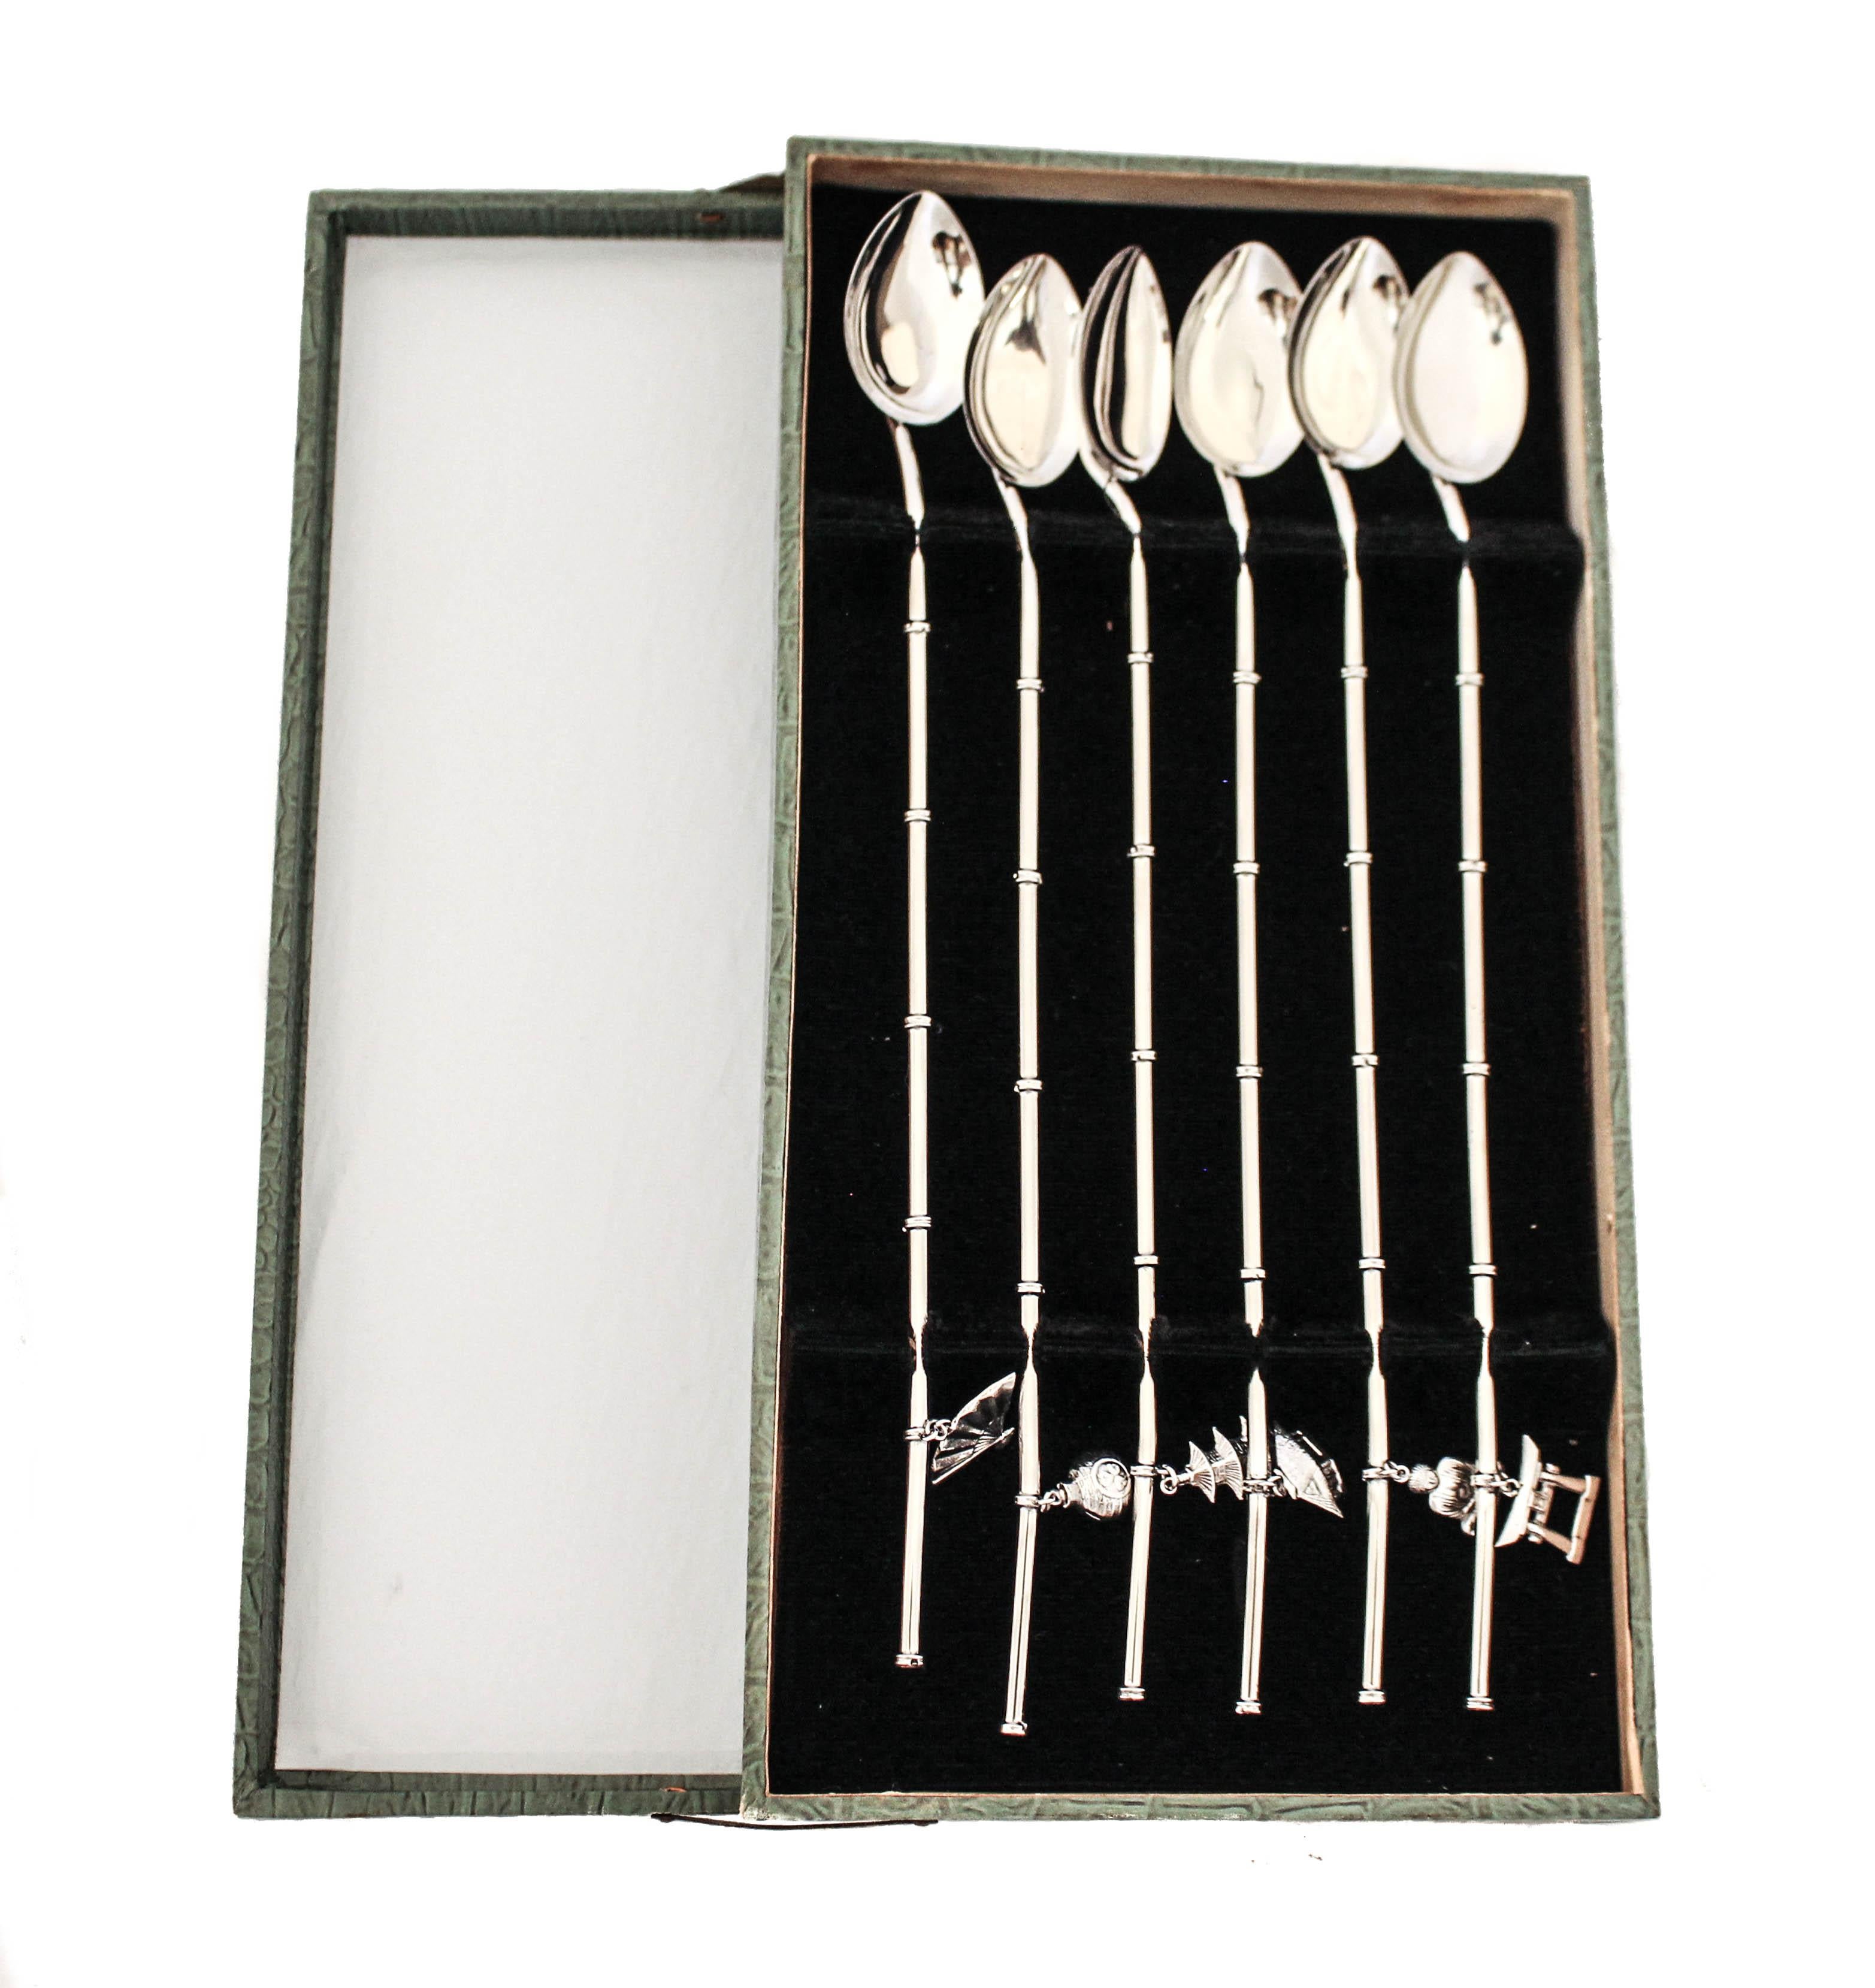 Being offered is a complete set of twelve ice tea / mint julep spoons. Each set of six come in the original case. The case has hinges on the side and a slot for each individual spoon to lock into. In keeping with the Asian theme, the spoons look